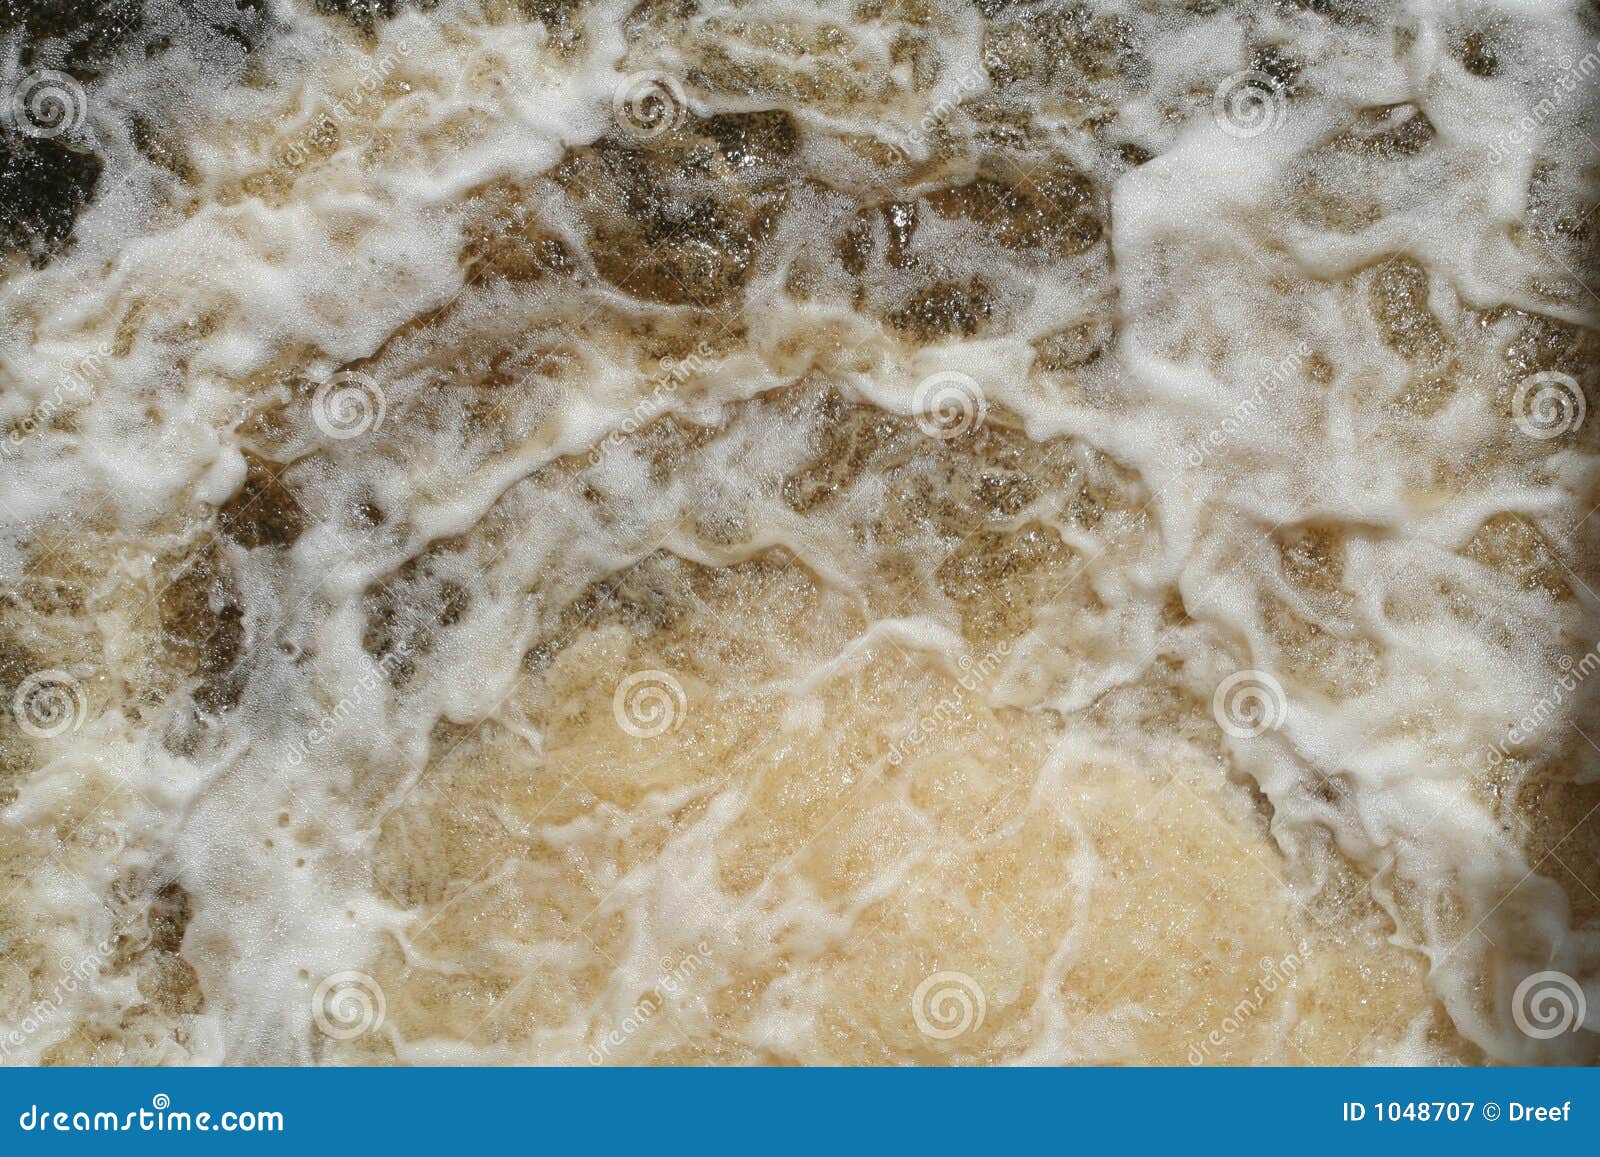 frothy water